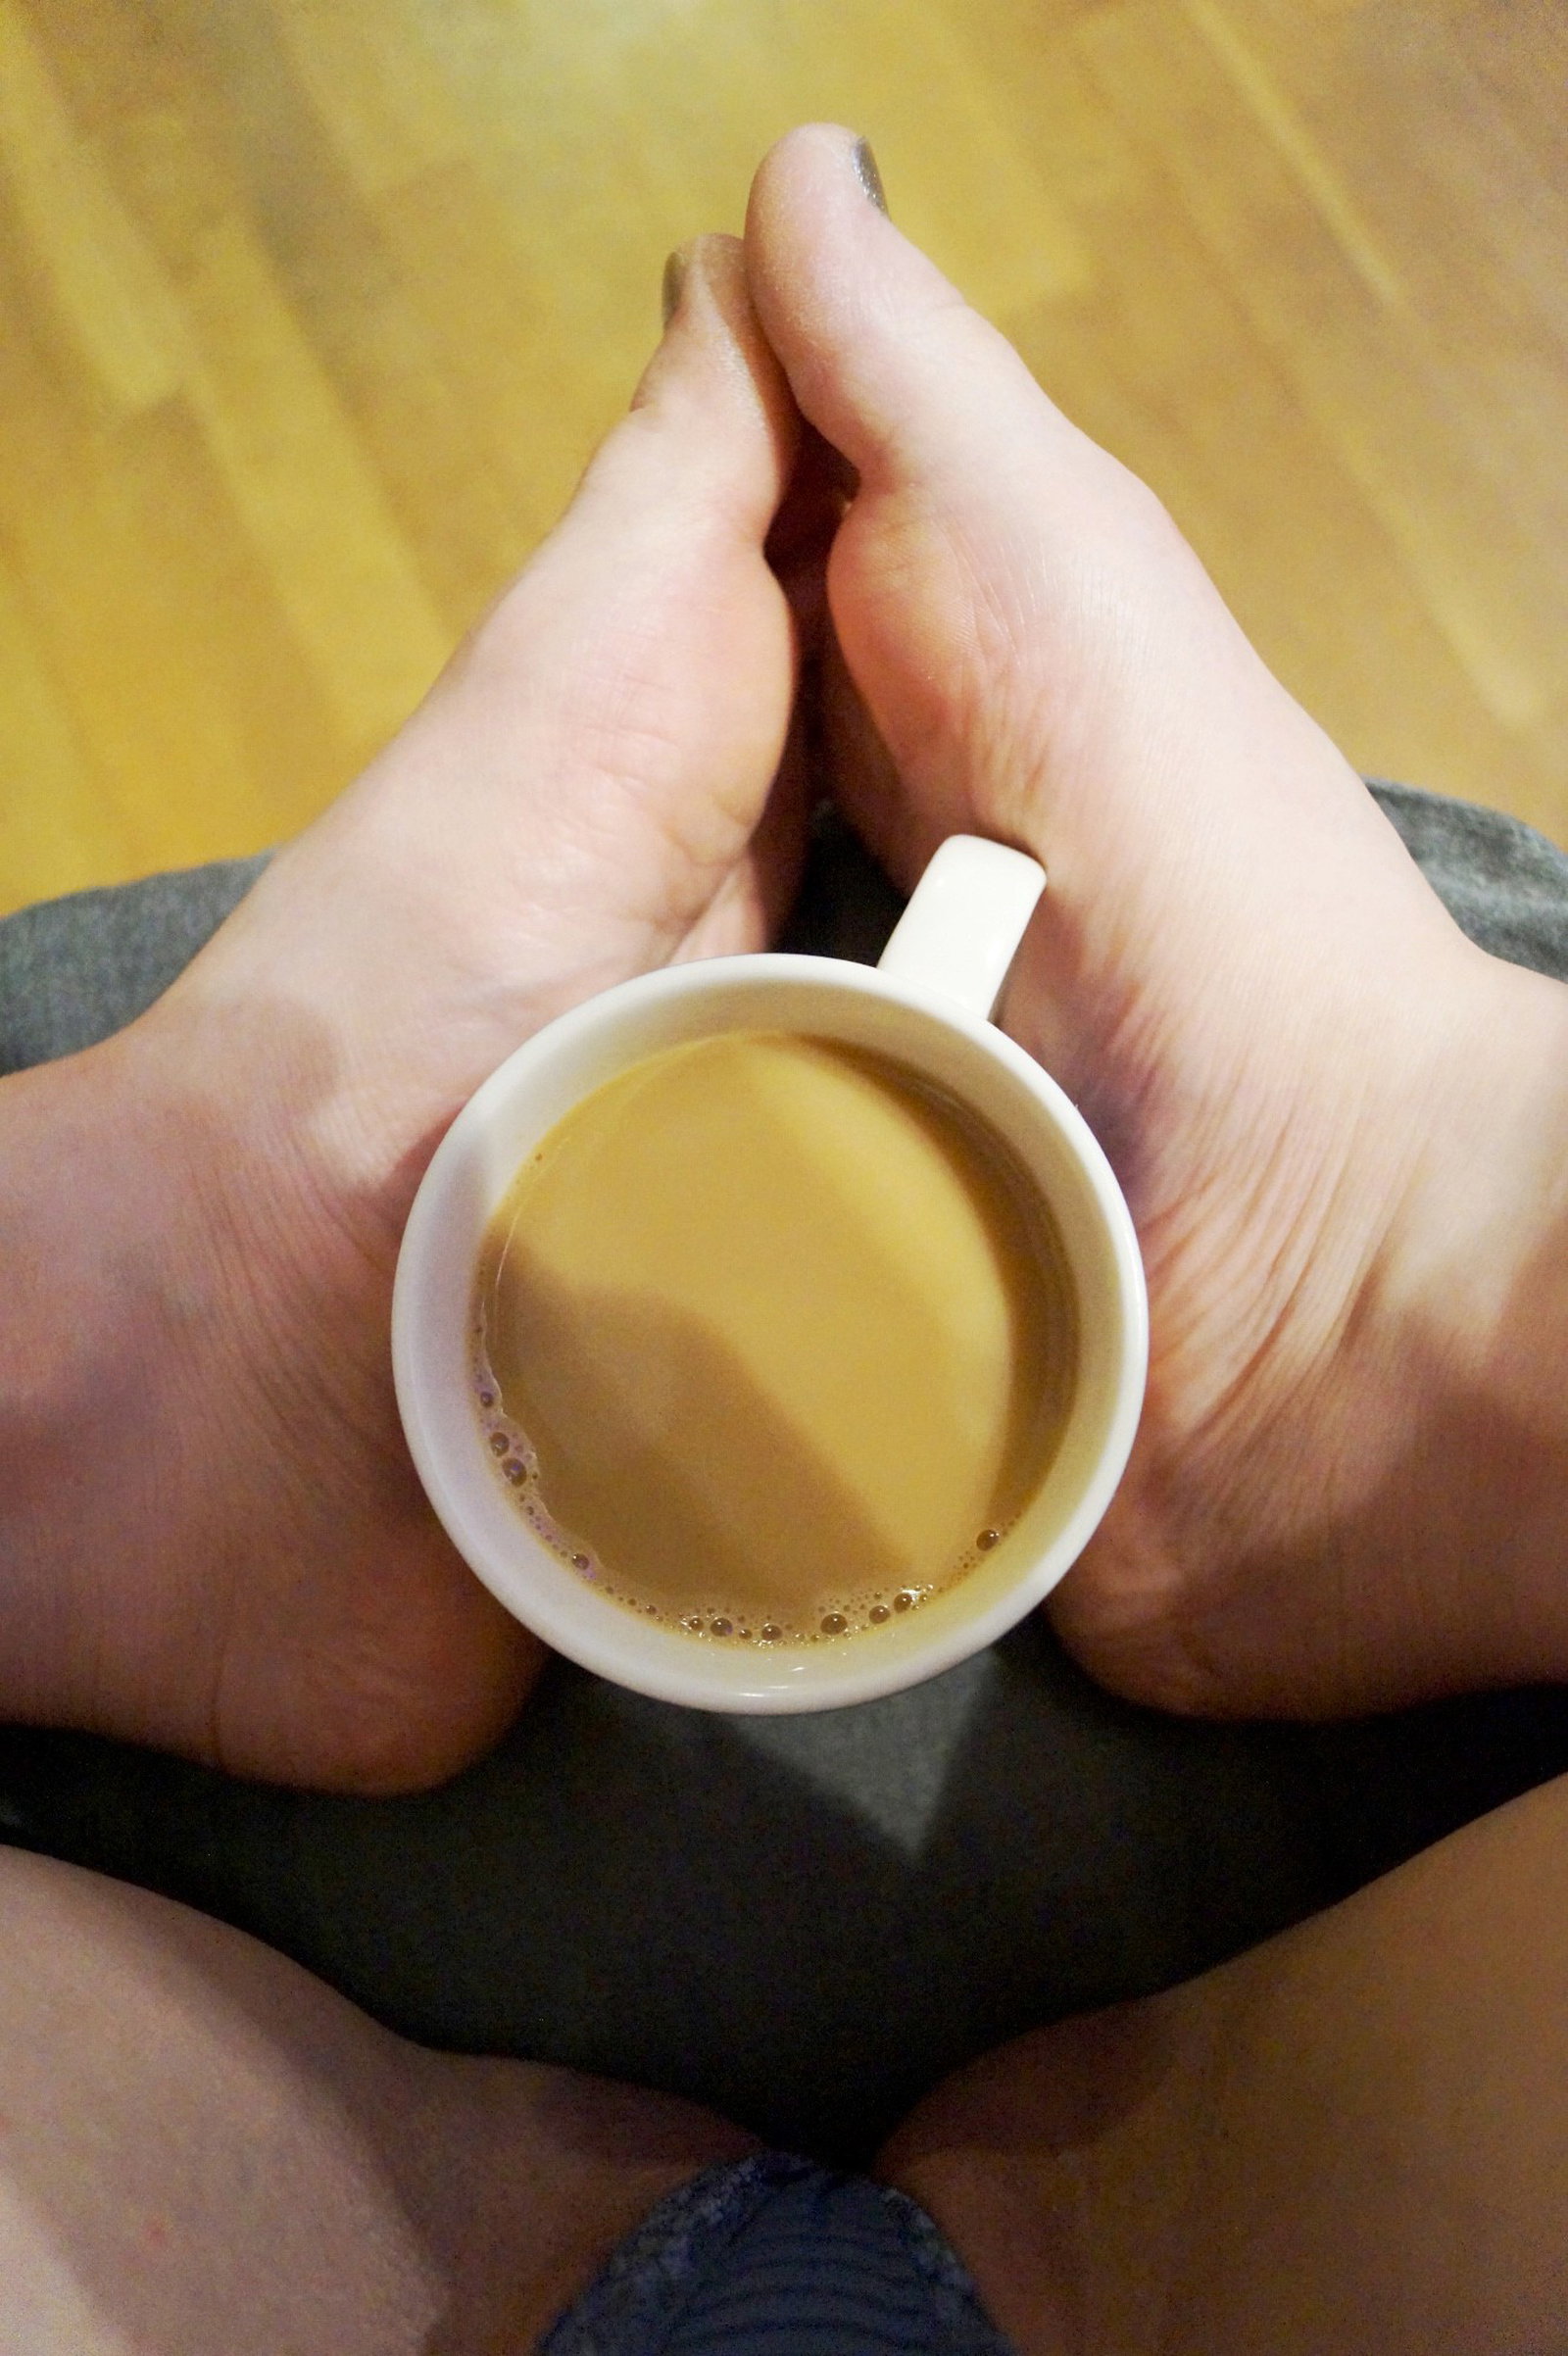 Photo by Barefoot with the username @toestoestoes, who is a verified user,  January 12, 2019 at 2:05 PM. The post is about the topic Foot Fetish and the text says 'Good morning... <3'